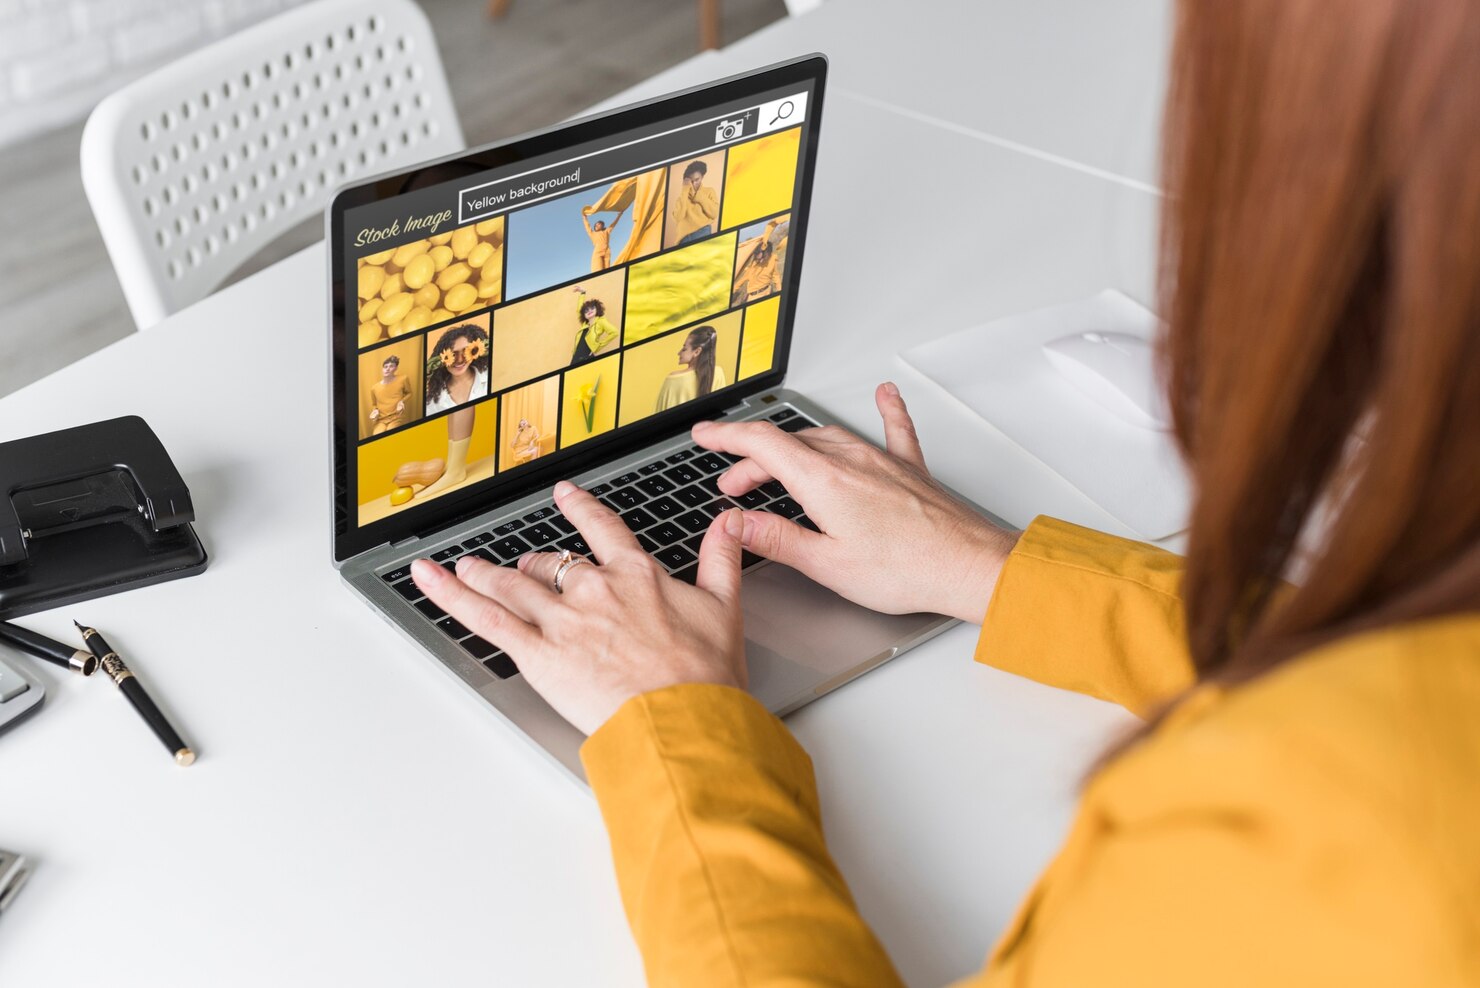 High quality images on a laptop screen. Woman looking at images on online shop